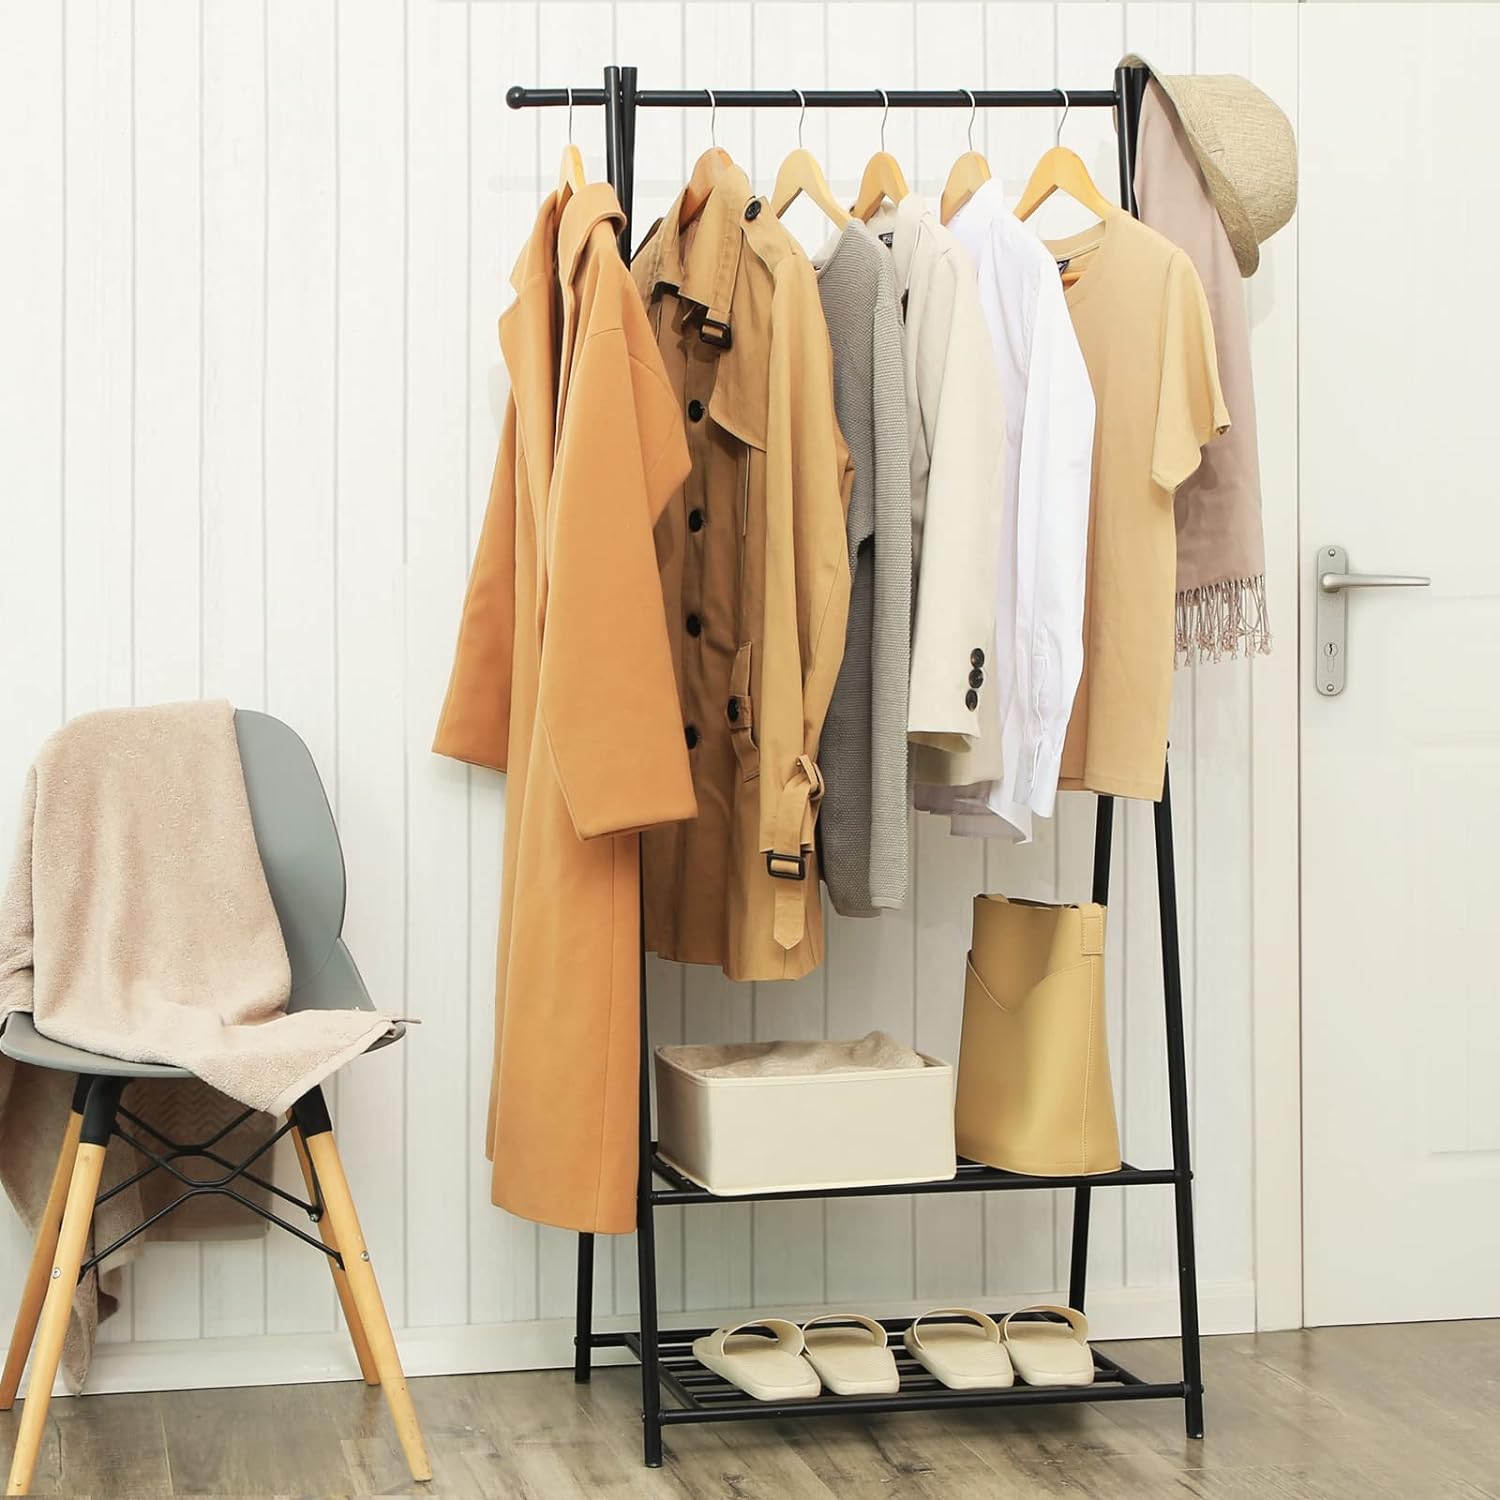 Clothes Rail, Coat Stand, Coat Rack with Shoe Storage, Industrial Clothes Rail, Metal Frame, SONGMICS